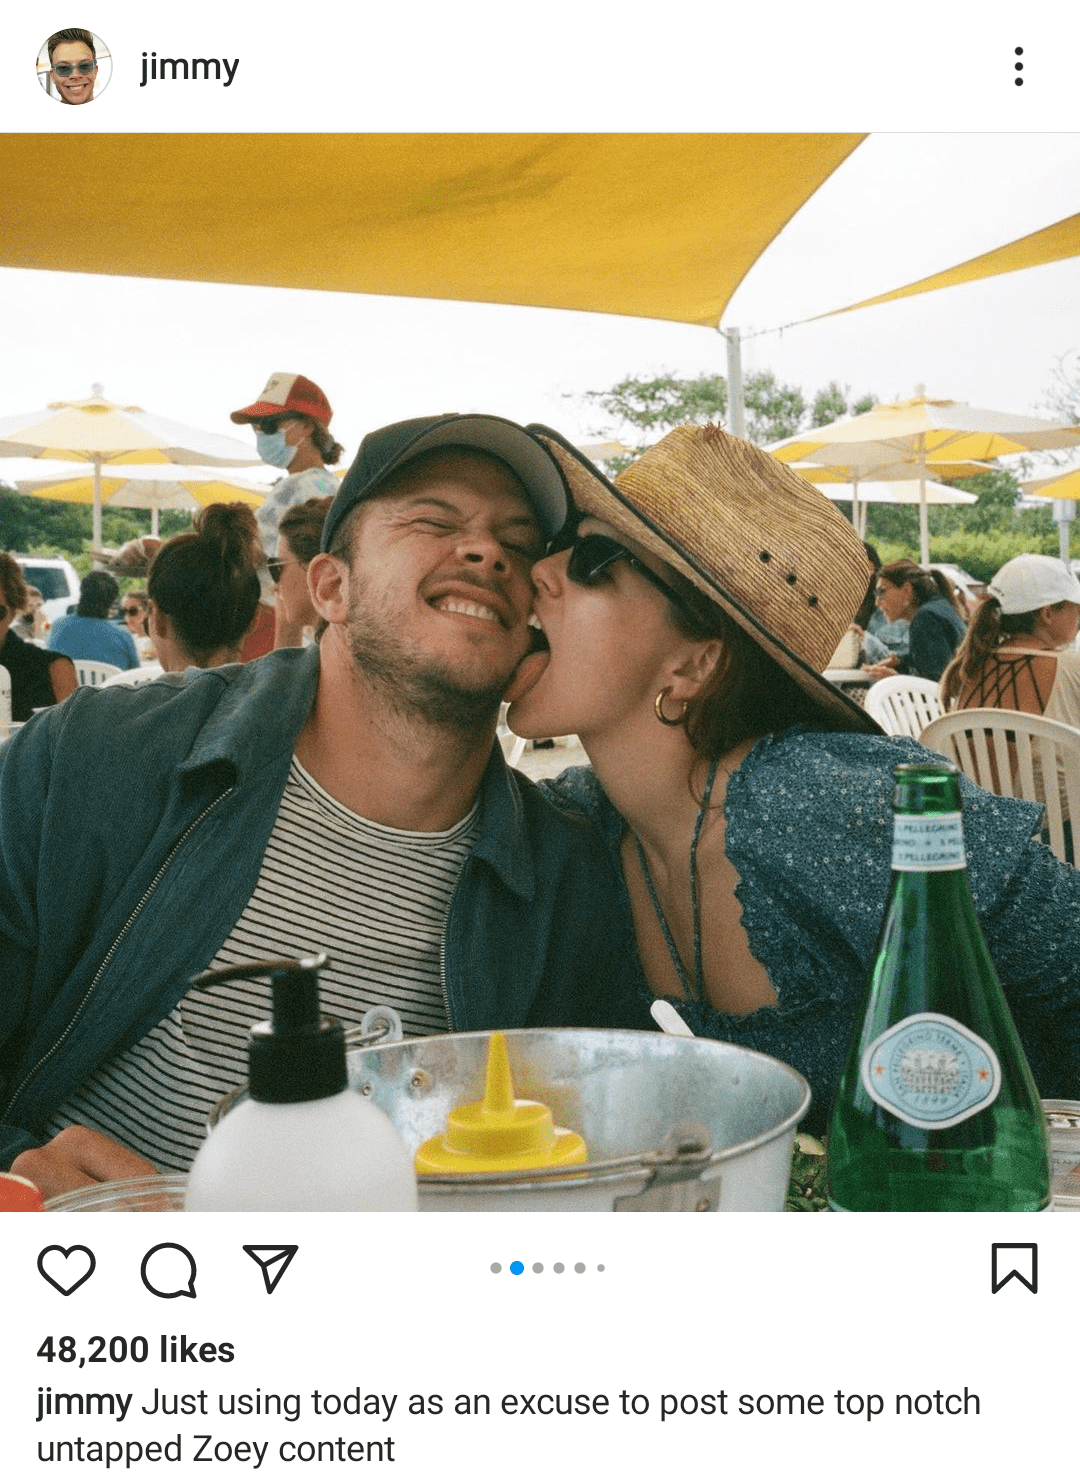 Confirmation of Jimmy Tatro and Zoey Deutch's relationship shared on Instagram on February 14, 2021 | Photo: Instagram/jimmy